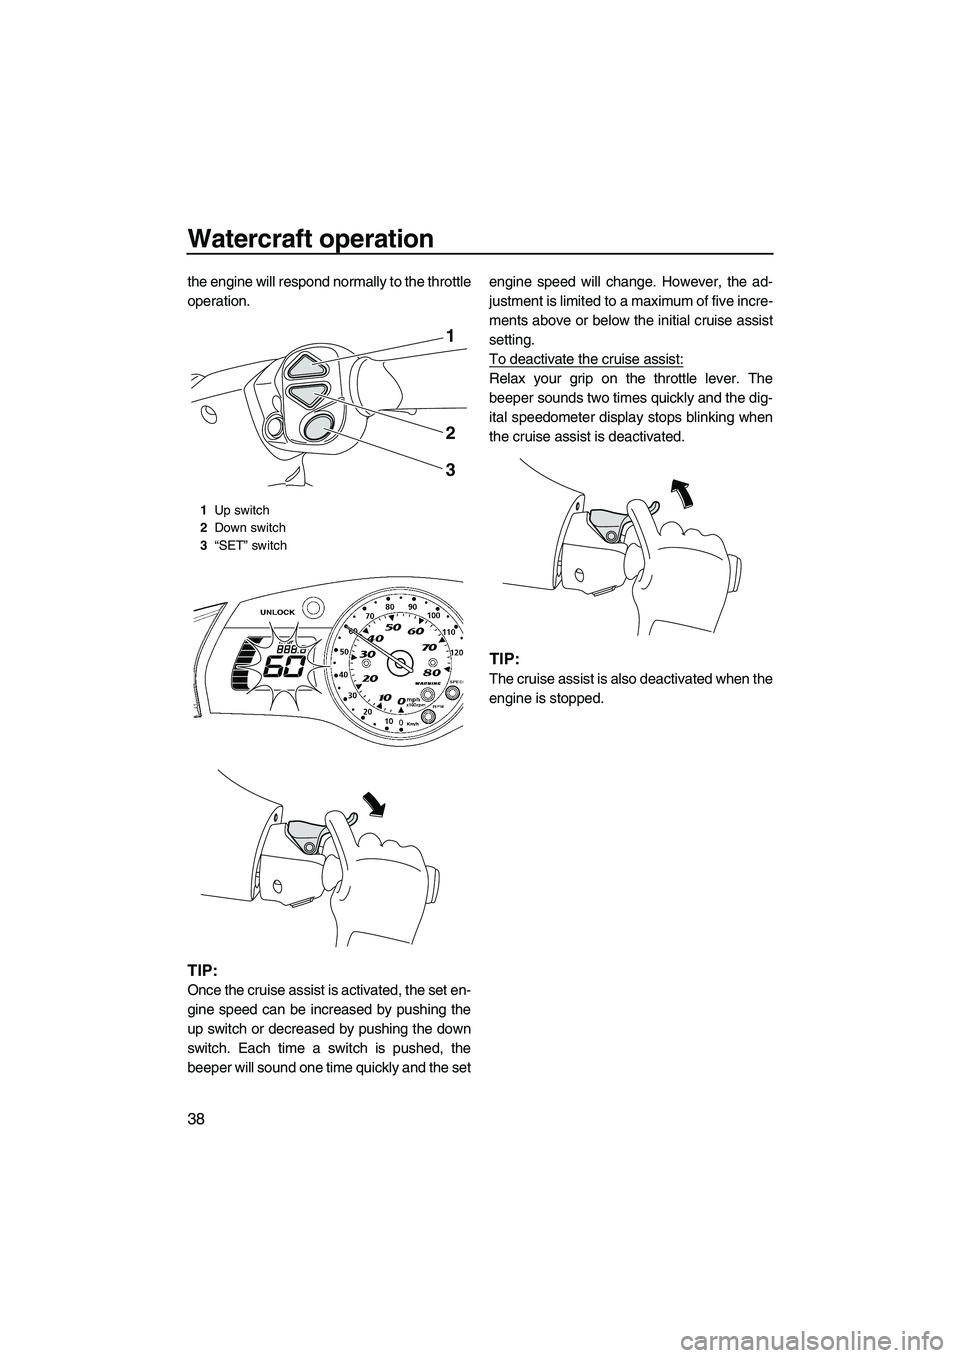 YAMAHA SVHO 2011  Owners Manual Watercraft operation
38
the engine will respond normally to the throttle
operation.
TIP:
Once the cruise assist is activated, the set en-
gine speed can be increased by pushing the
up switch or decrea